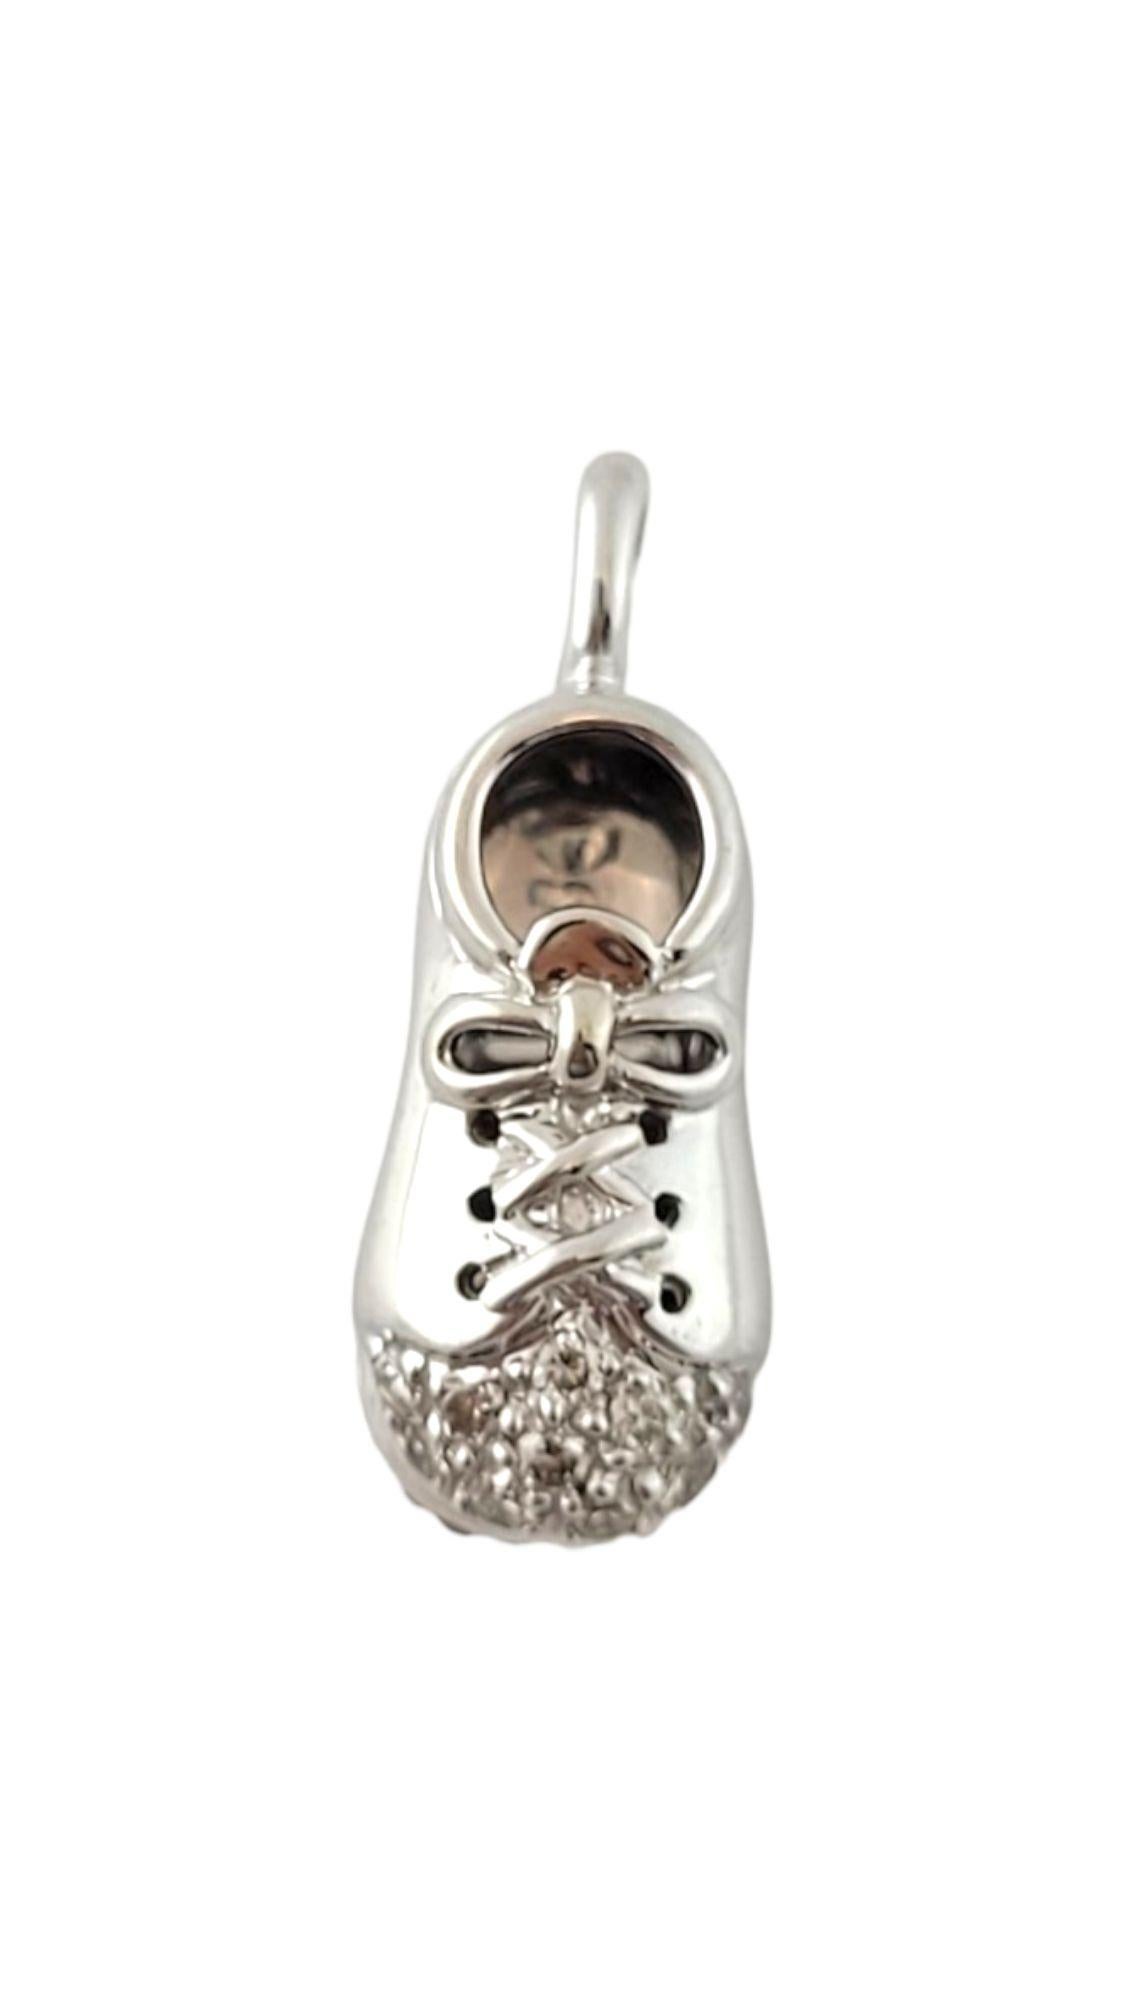 Vintage 14K White Gold Diamond Shoe Charm

This adorable shoe charm is crafted from 14K white gold and features 10 round brilliant cut diamonds!

Approximate total diamond weight: 0.15 cts

Diamond clarity: SI1-I1

Diamond color: I-K

Size: 23.2mm X